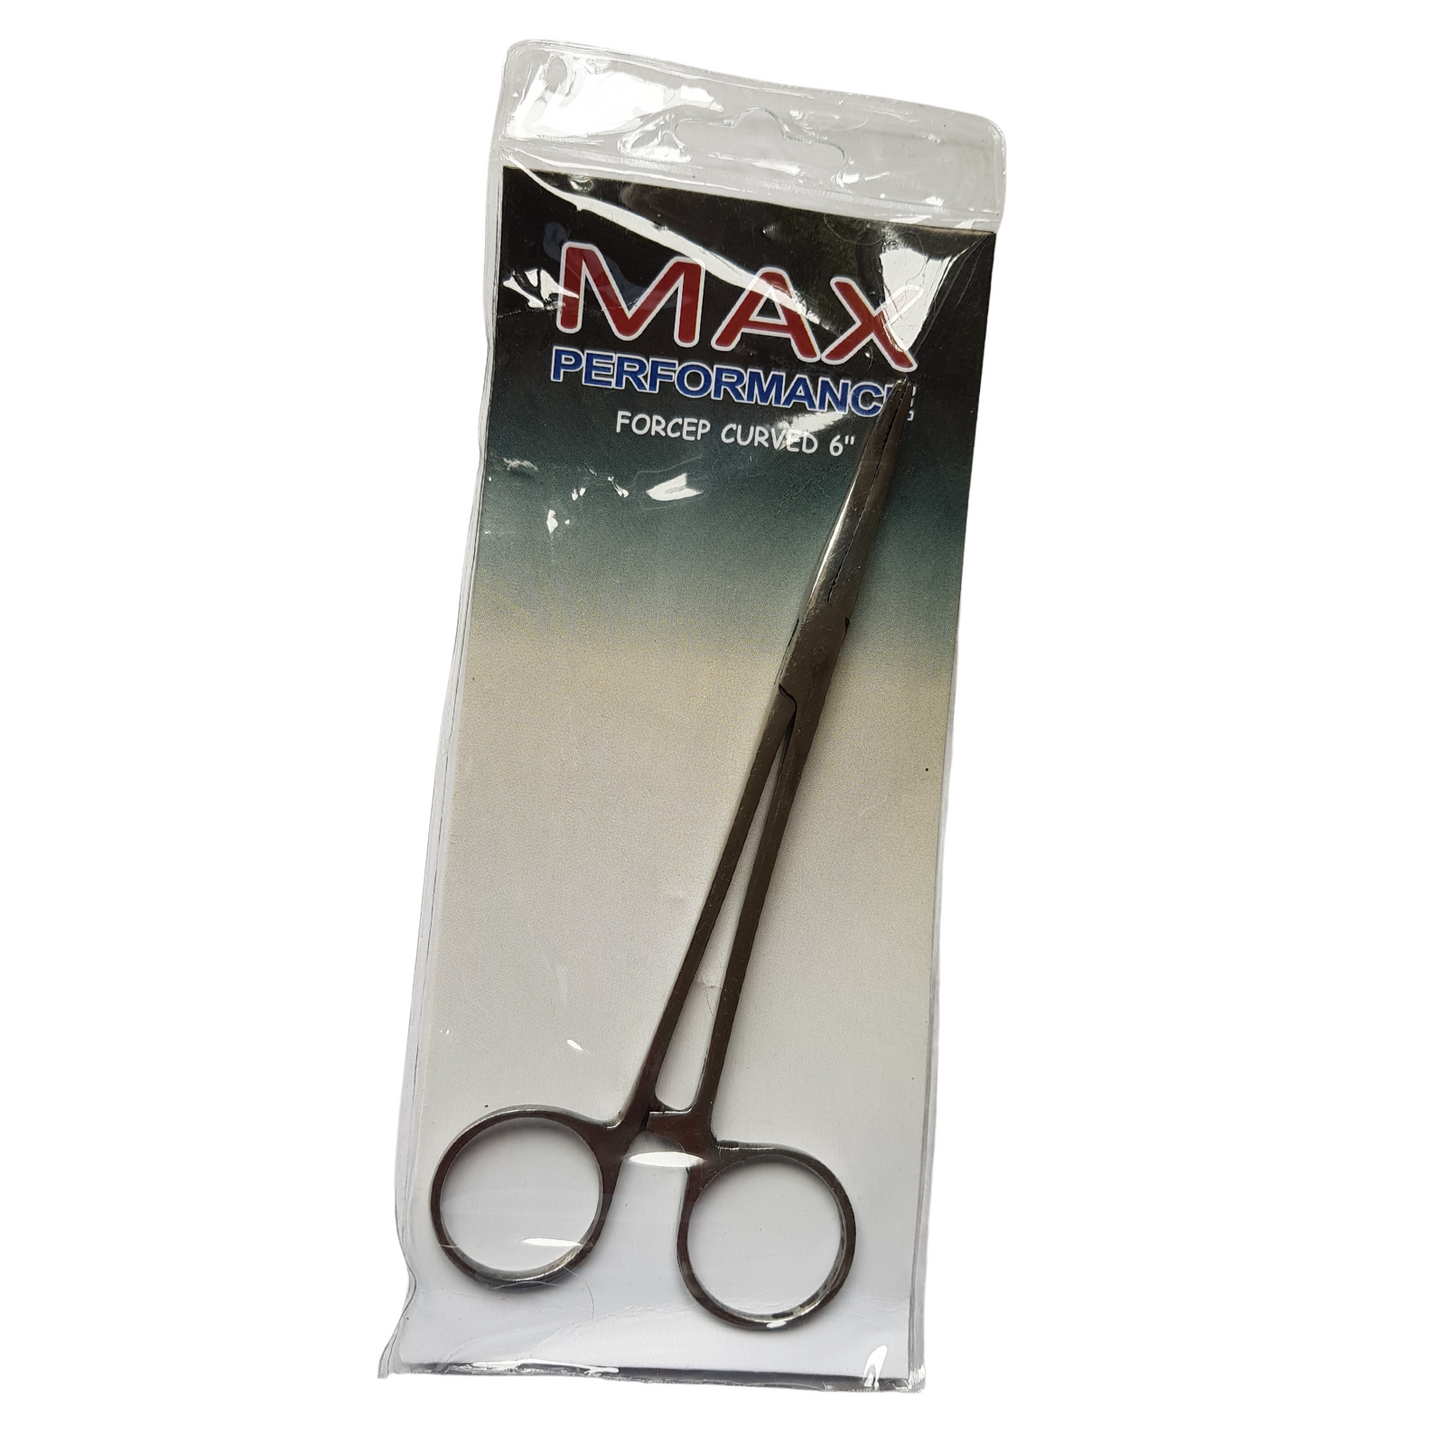 MAX PERFORMANCE CURVED STAINLESS STEEL 6 INCH FORCEPS